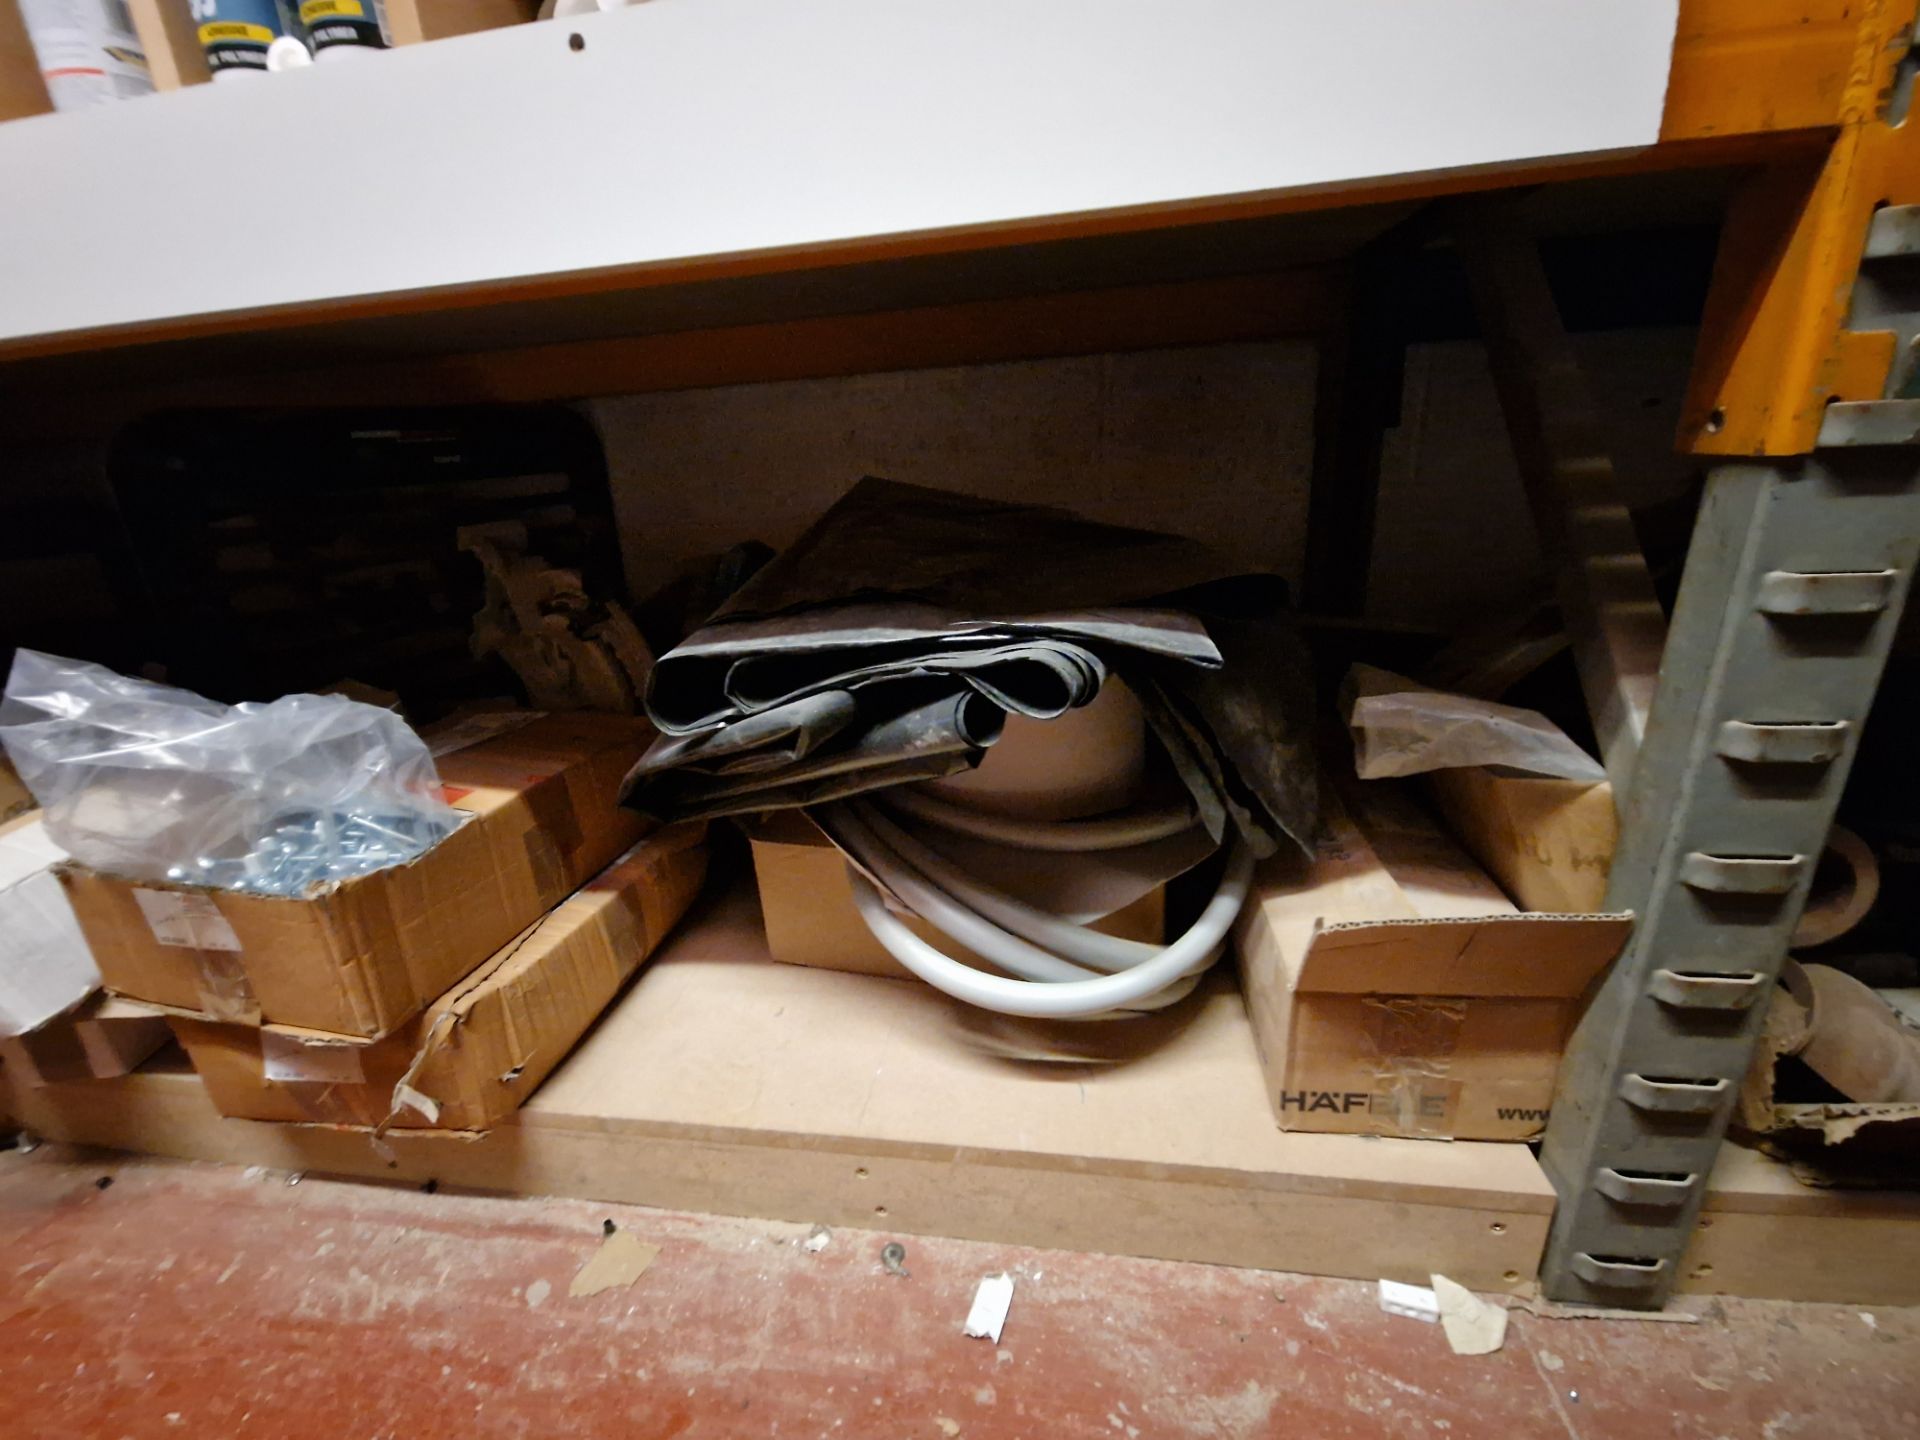 Contents to One Bay of Racking, including Fixtures, Fittings, Bolts, Drawer Runners, Bar Legs, - Image 3 of 32